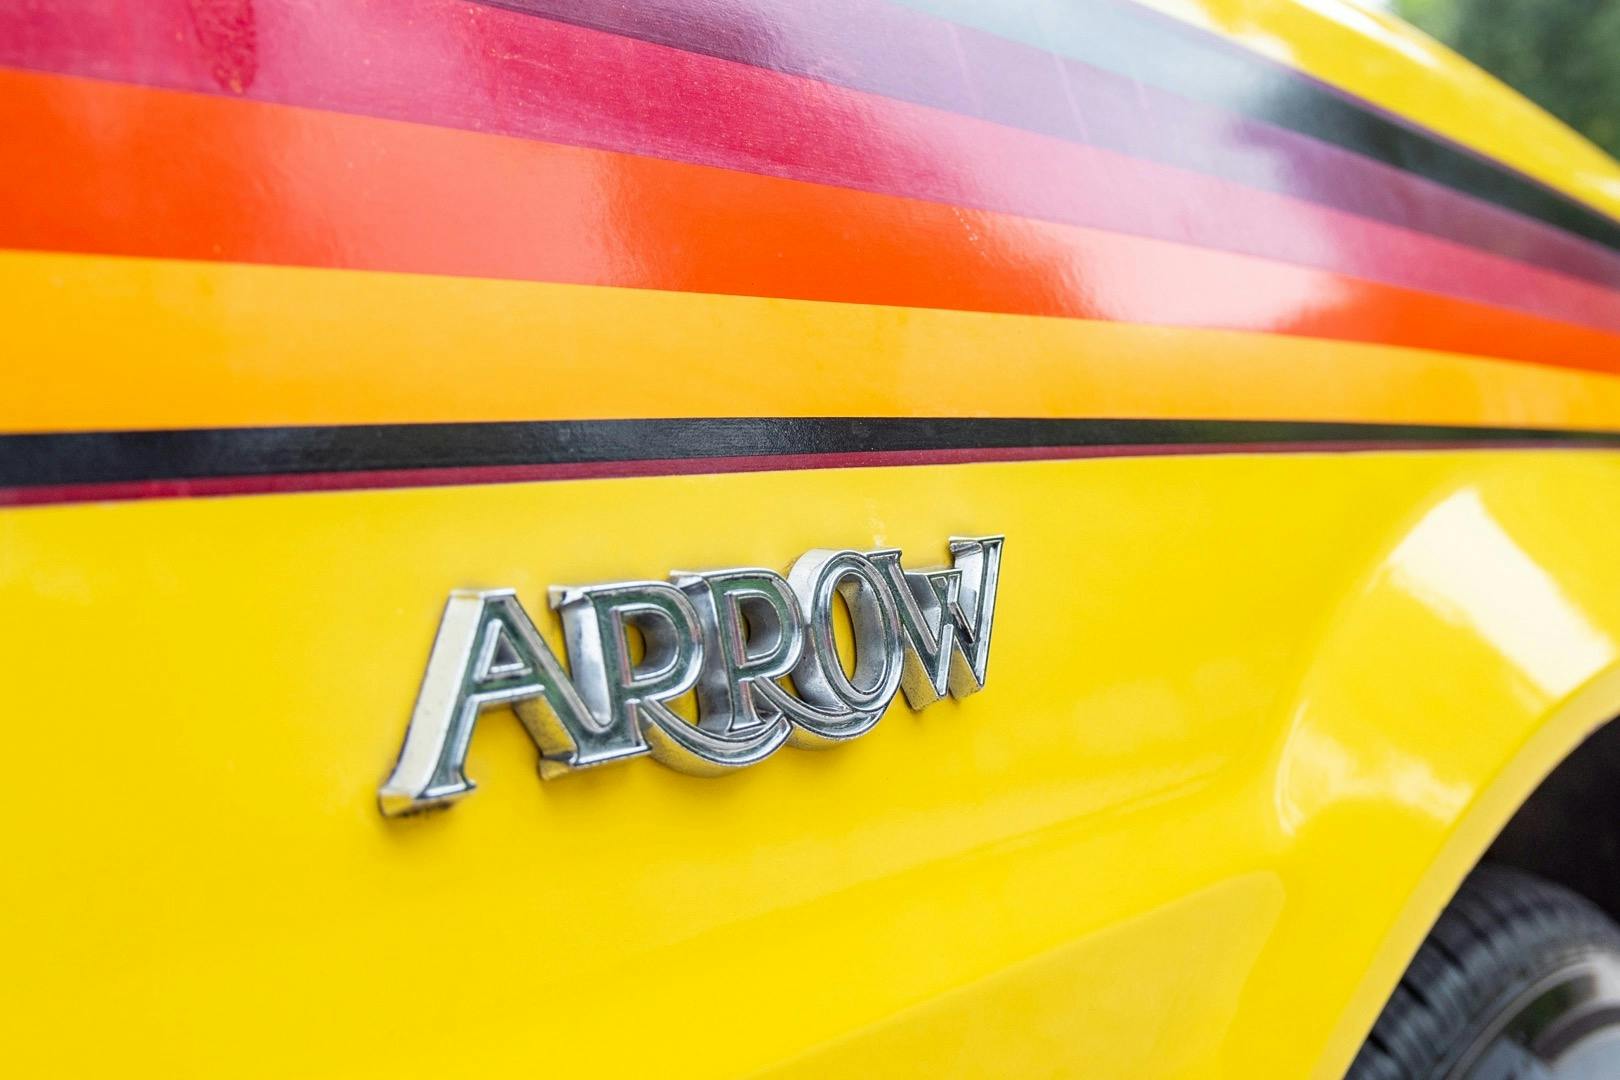 1980 Plymouth Arrow badge detail